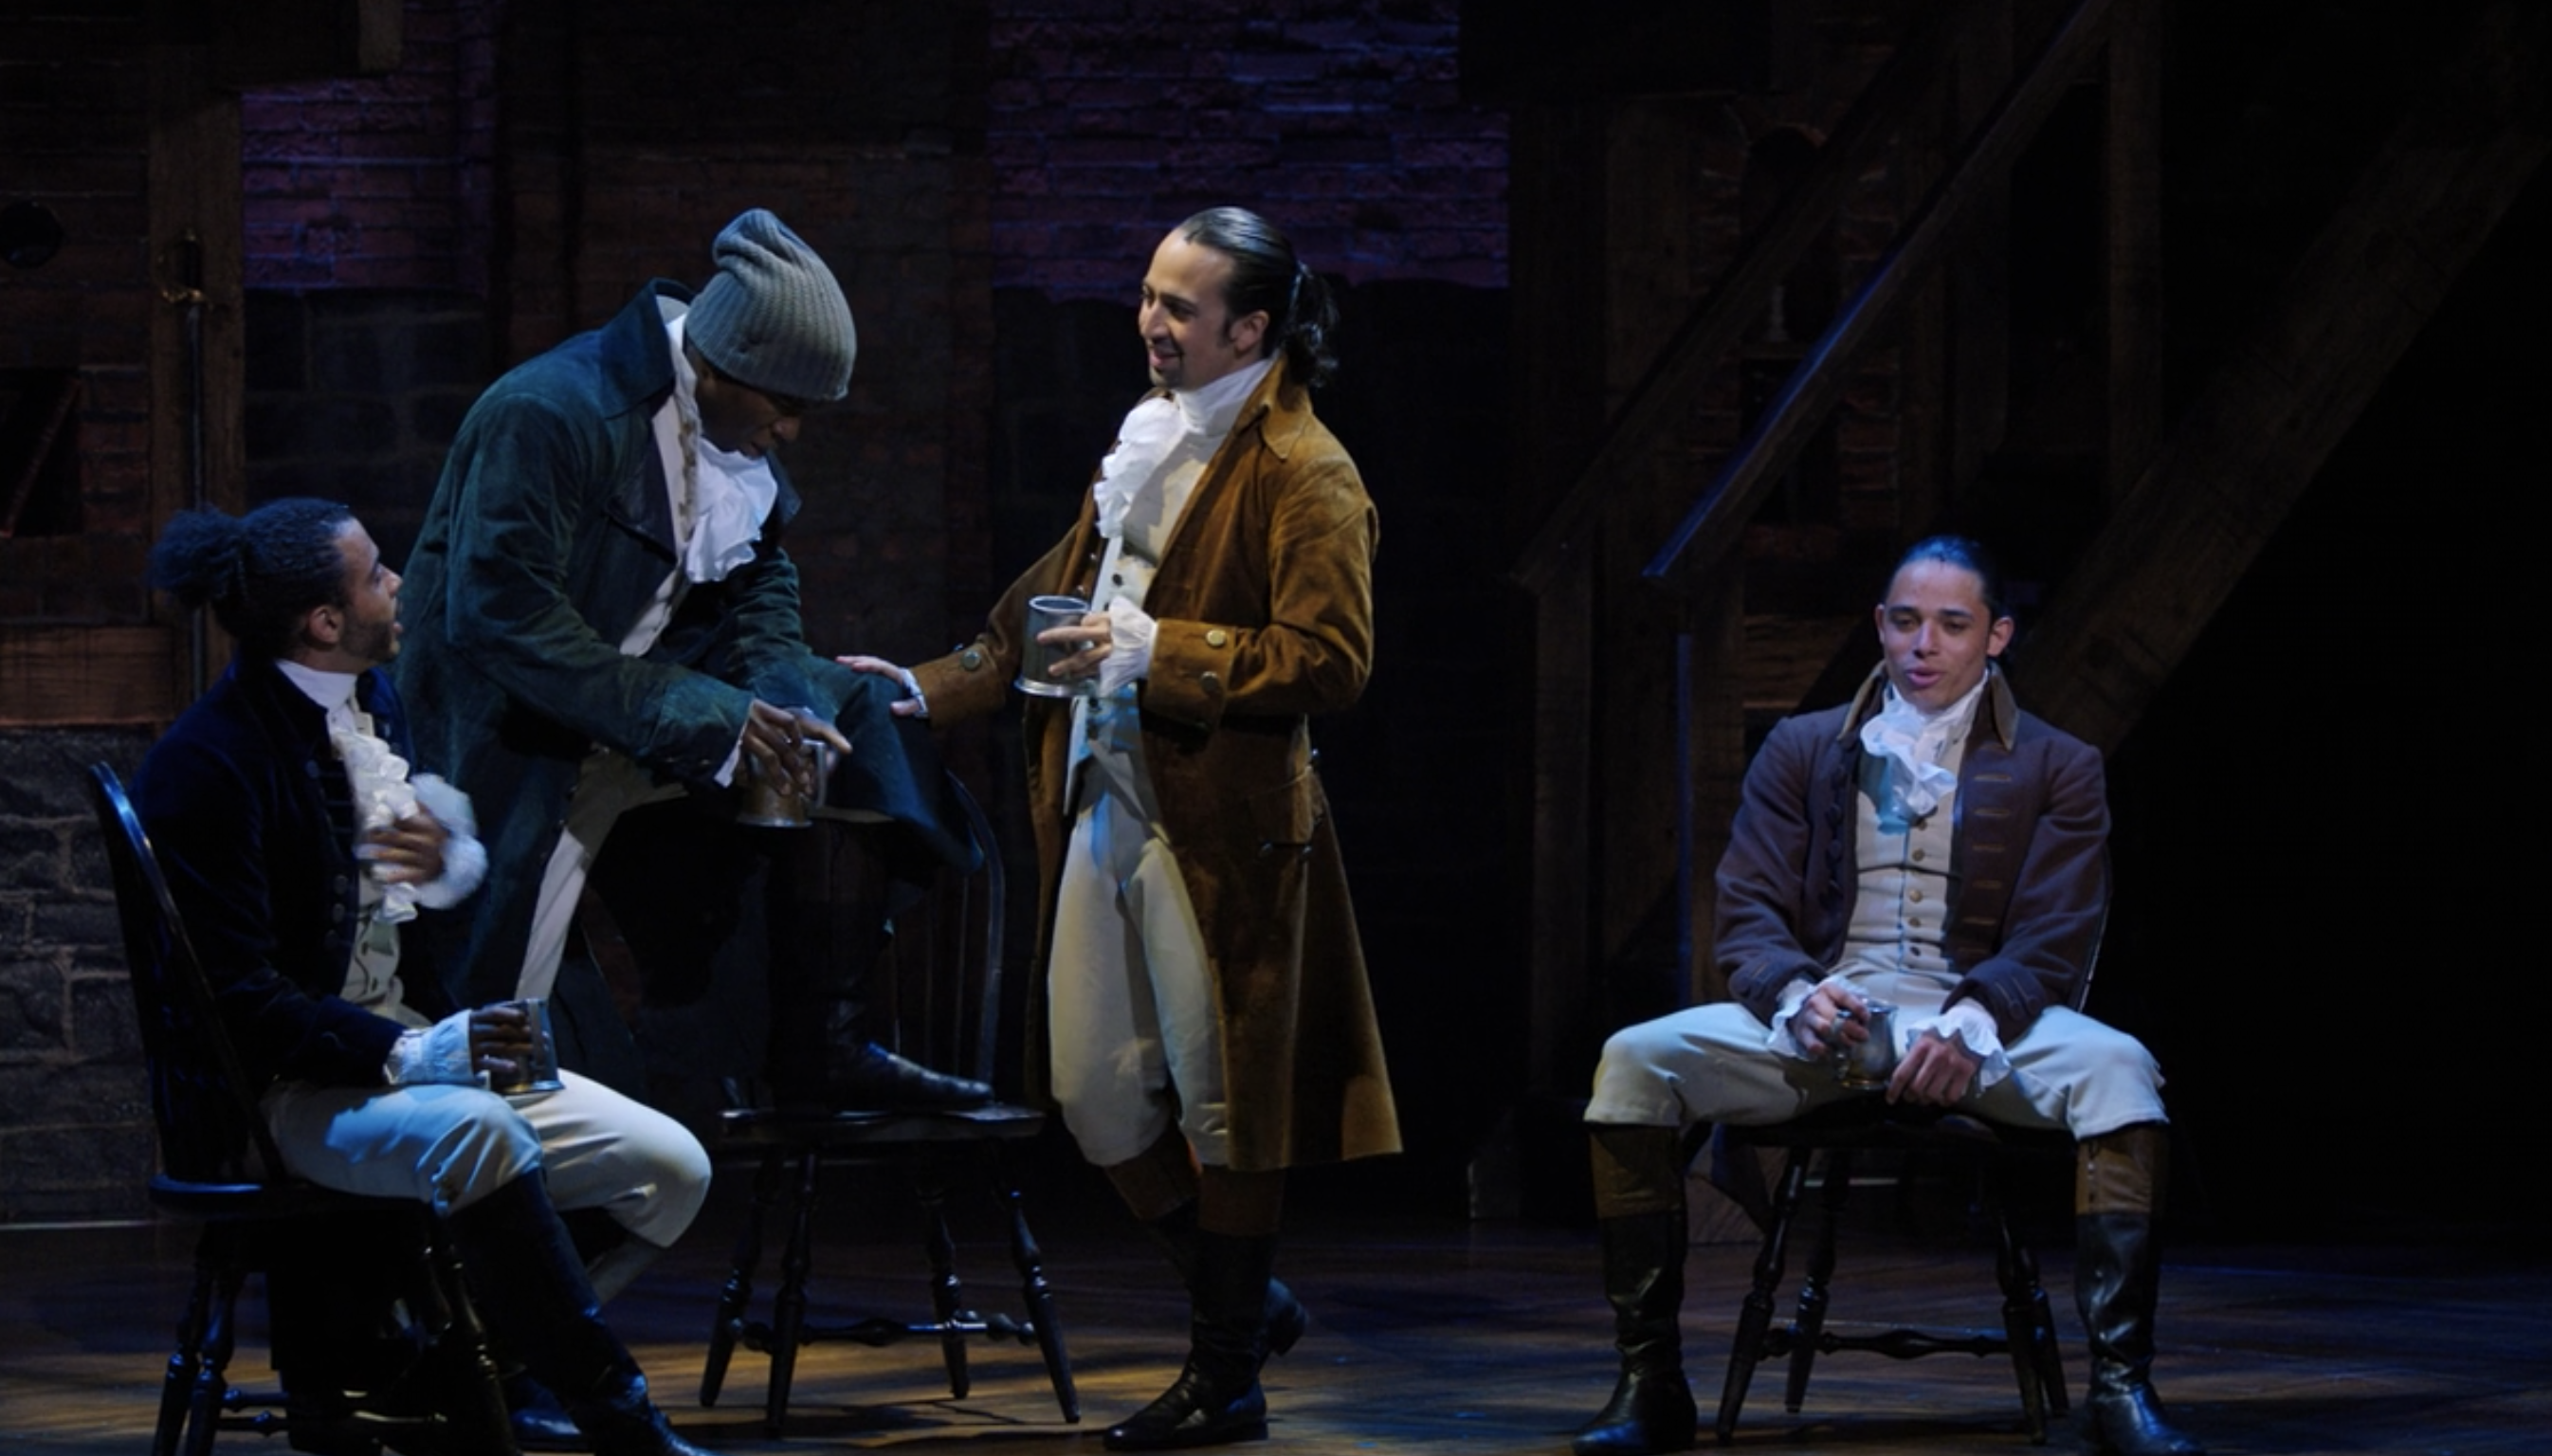 10 things you (likely) didn't know about 'Hamilton